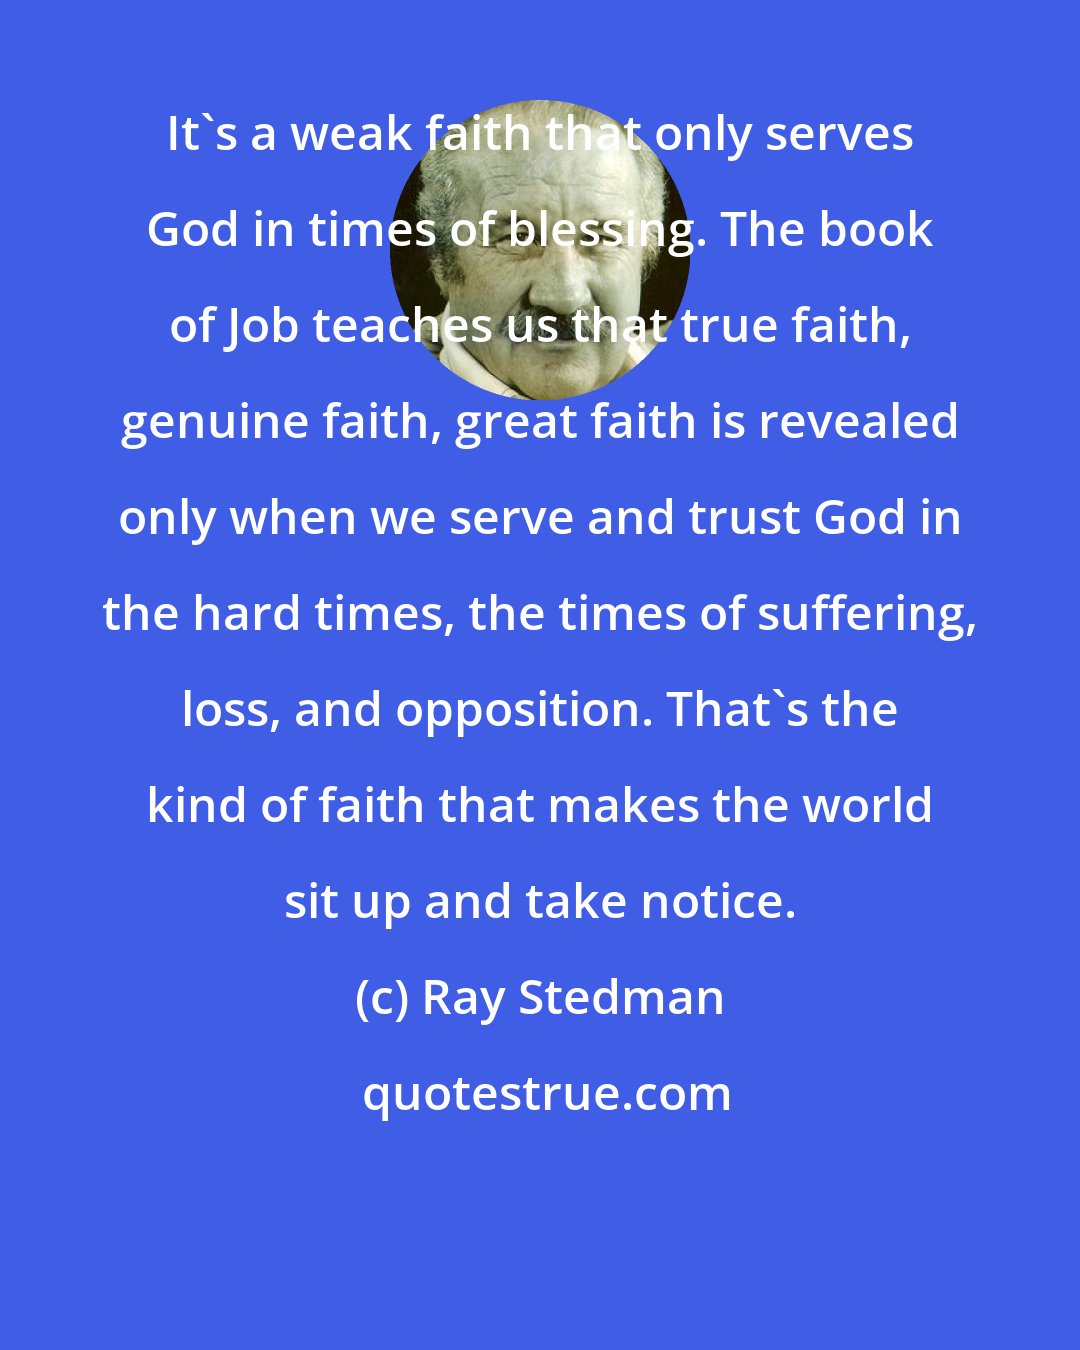 Ray Stedman: It's a weak faith that only serves God in times of blessing. The book of Job teaches us that true faith, genuine faith, great faith is revealed only when we serve and trust God in the hard times, the times of suffering, loss, and opposition. That's the kind of faith that makes the world sit up and take notice.